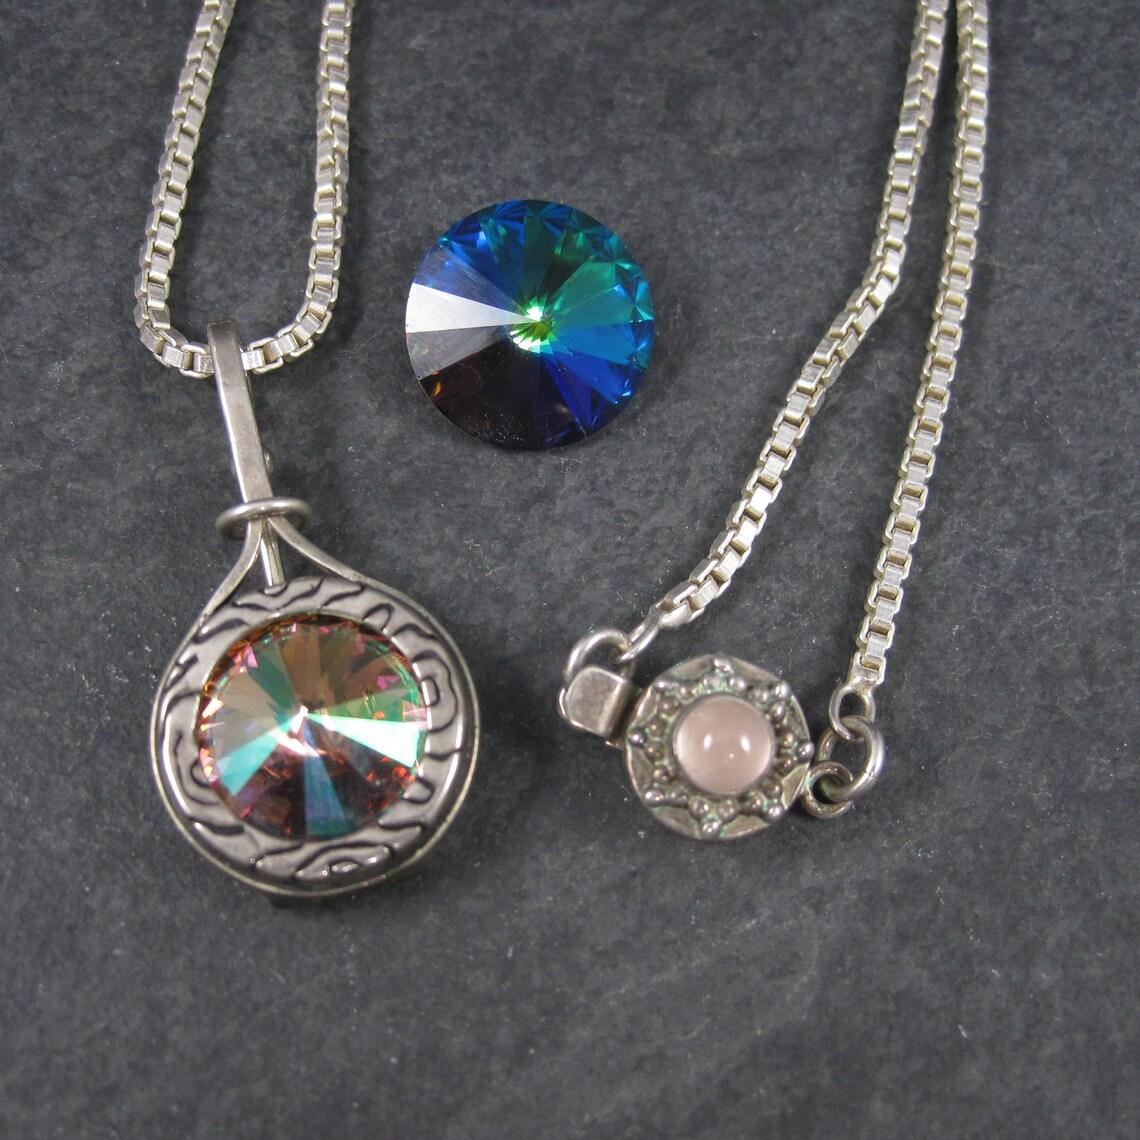 This gorgeous vintage pendant is sterling silver.
It features a 